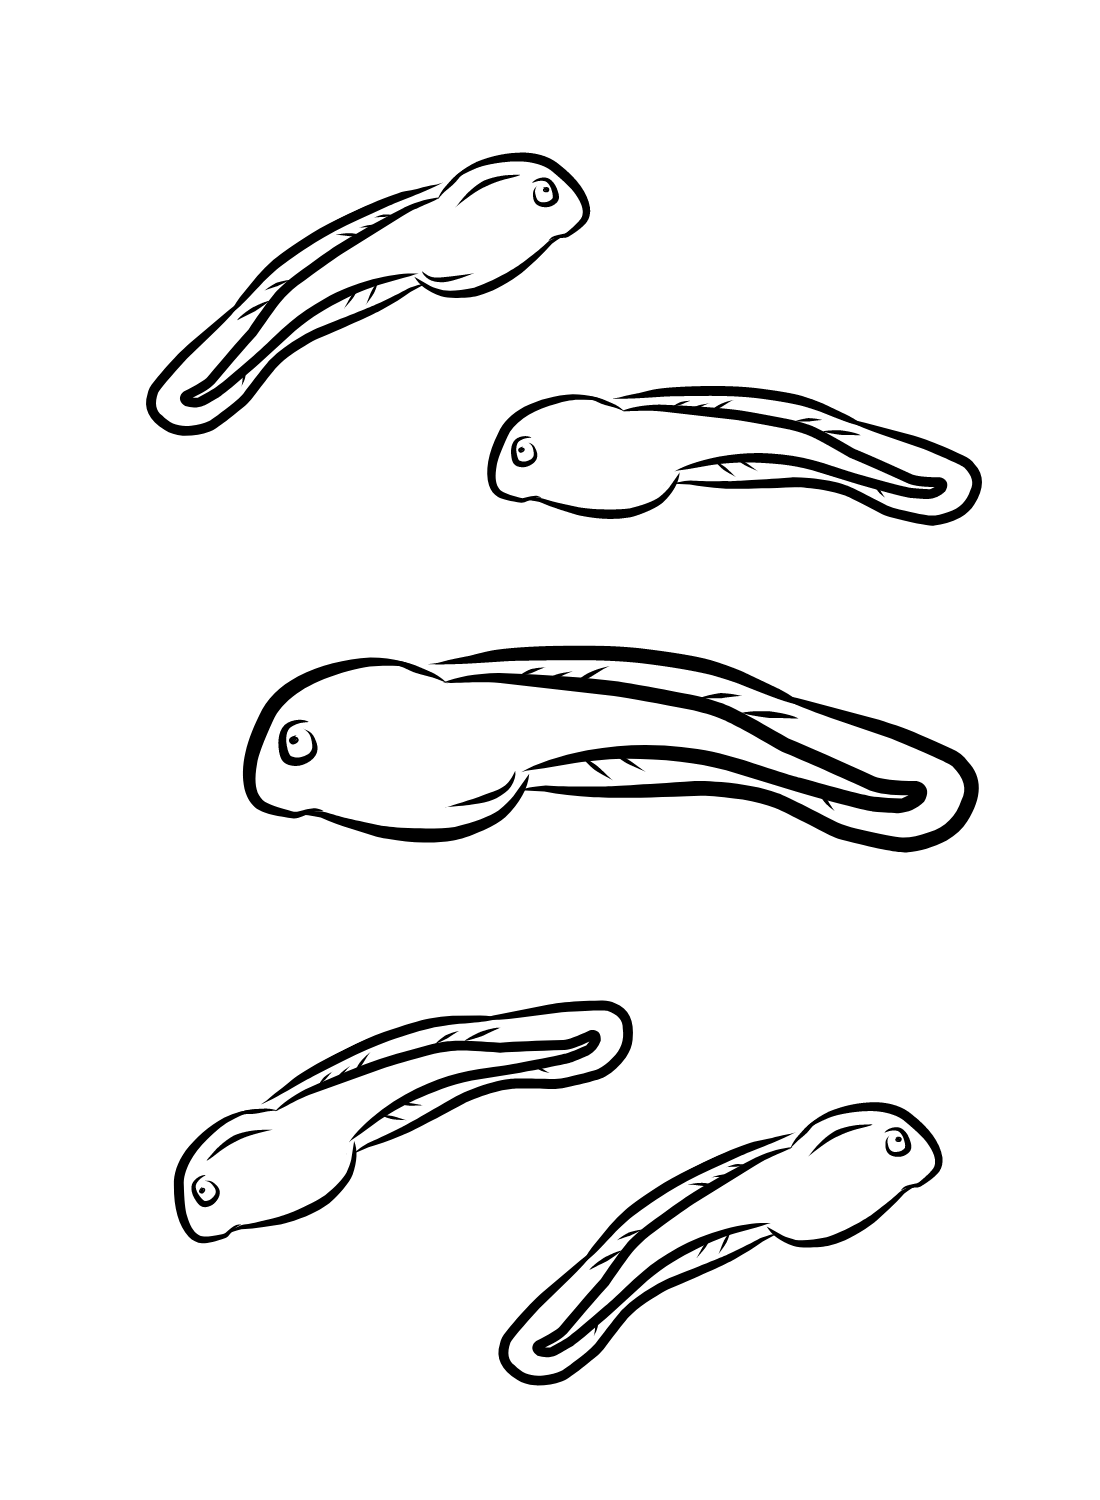 Tadpoles to Print Coloring Page